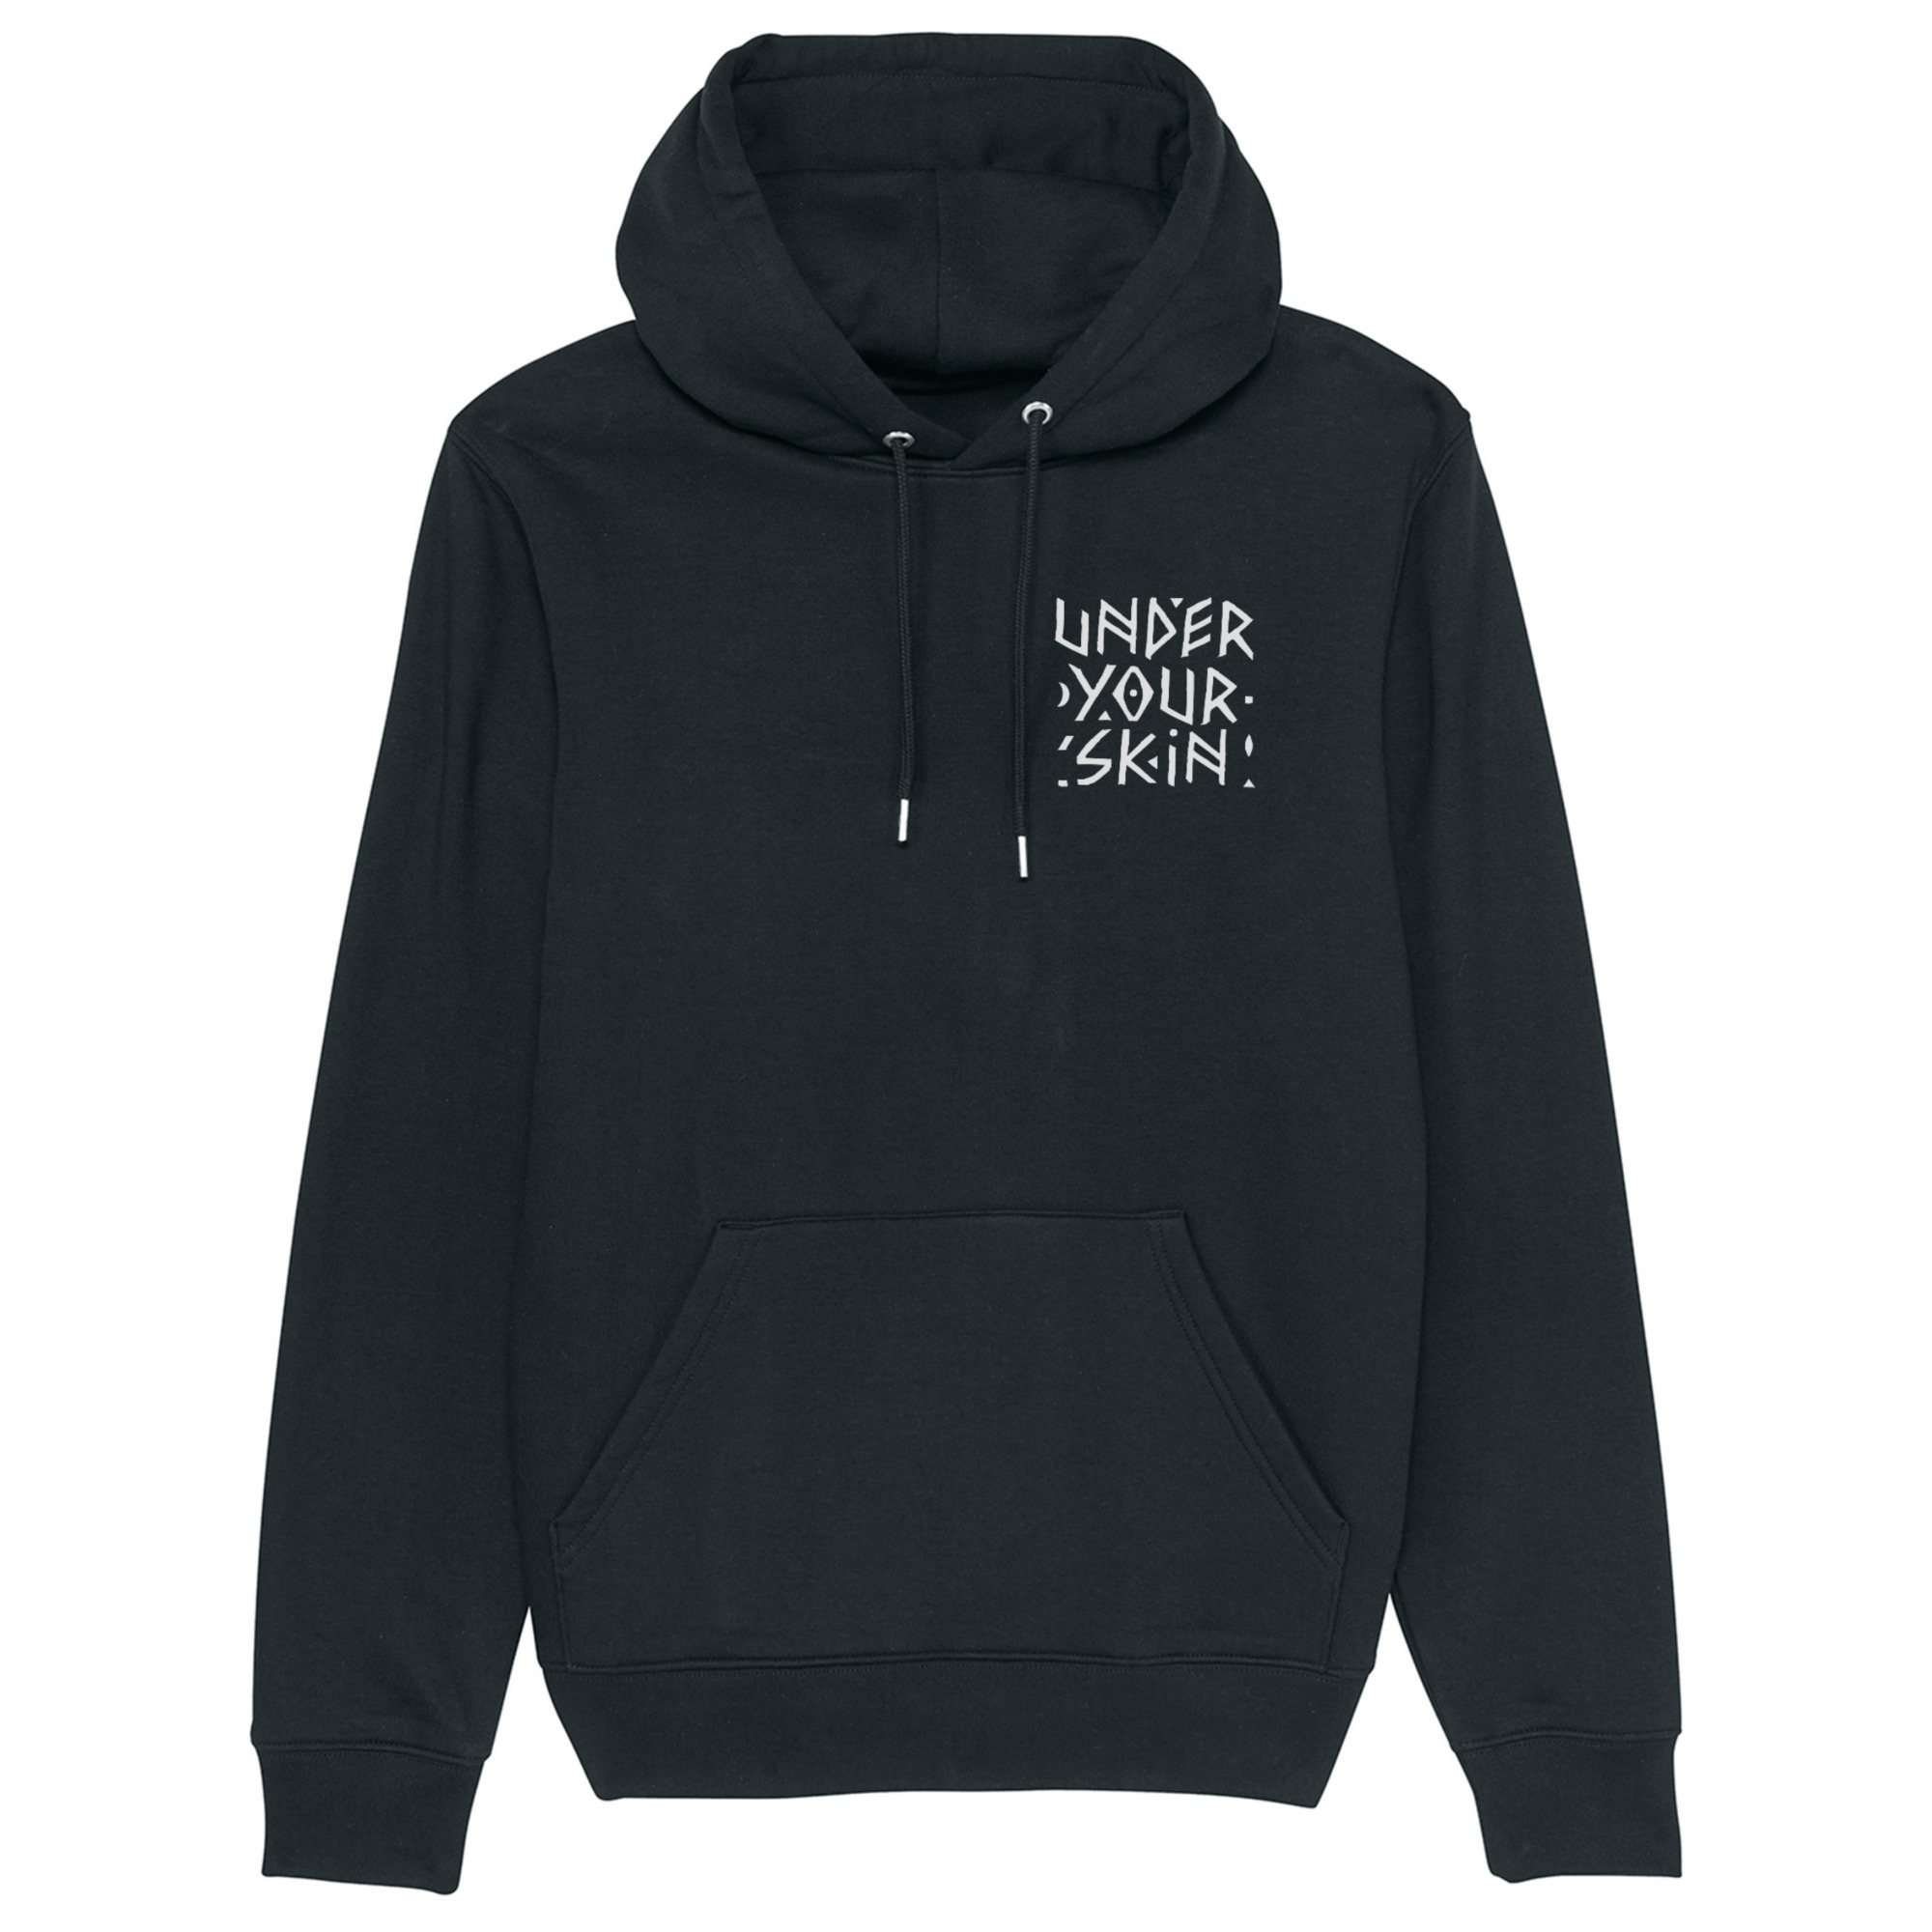 Underyourskin Unisex Pullover Hoodie - Cologne